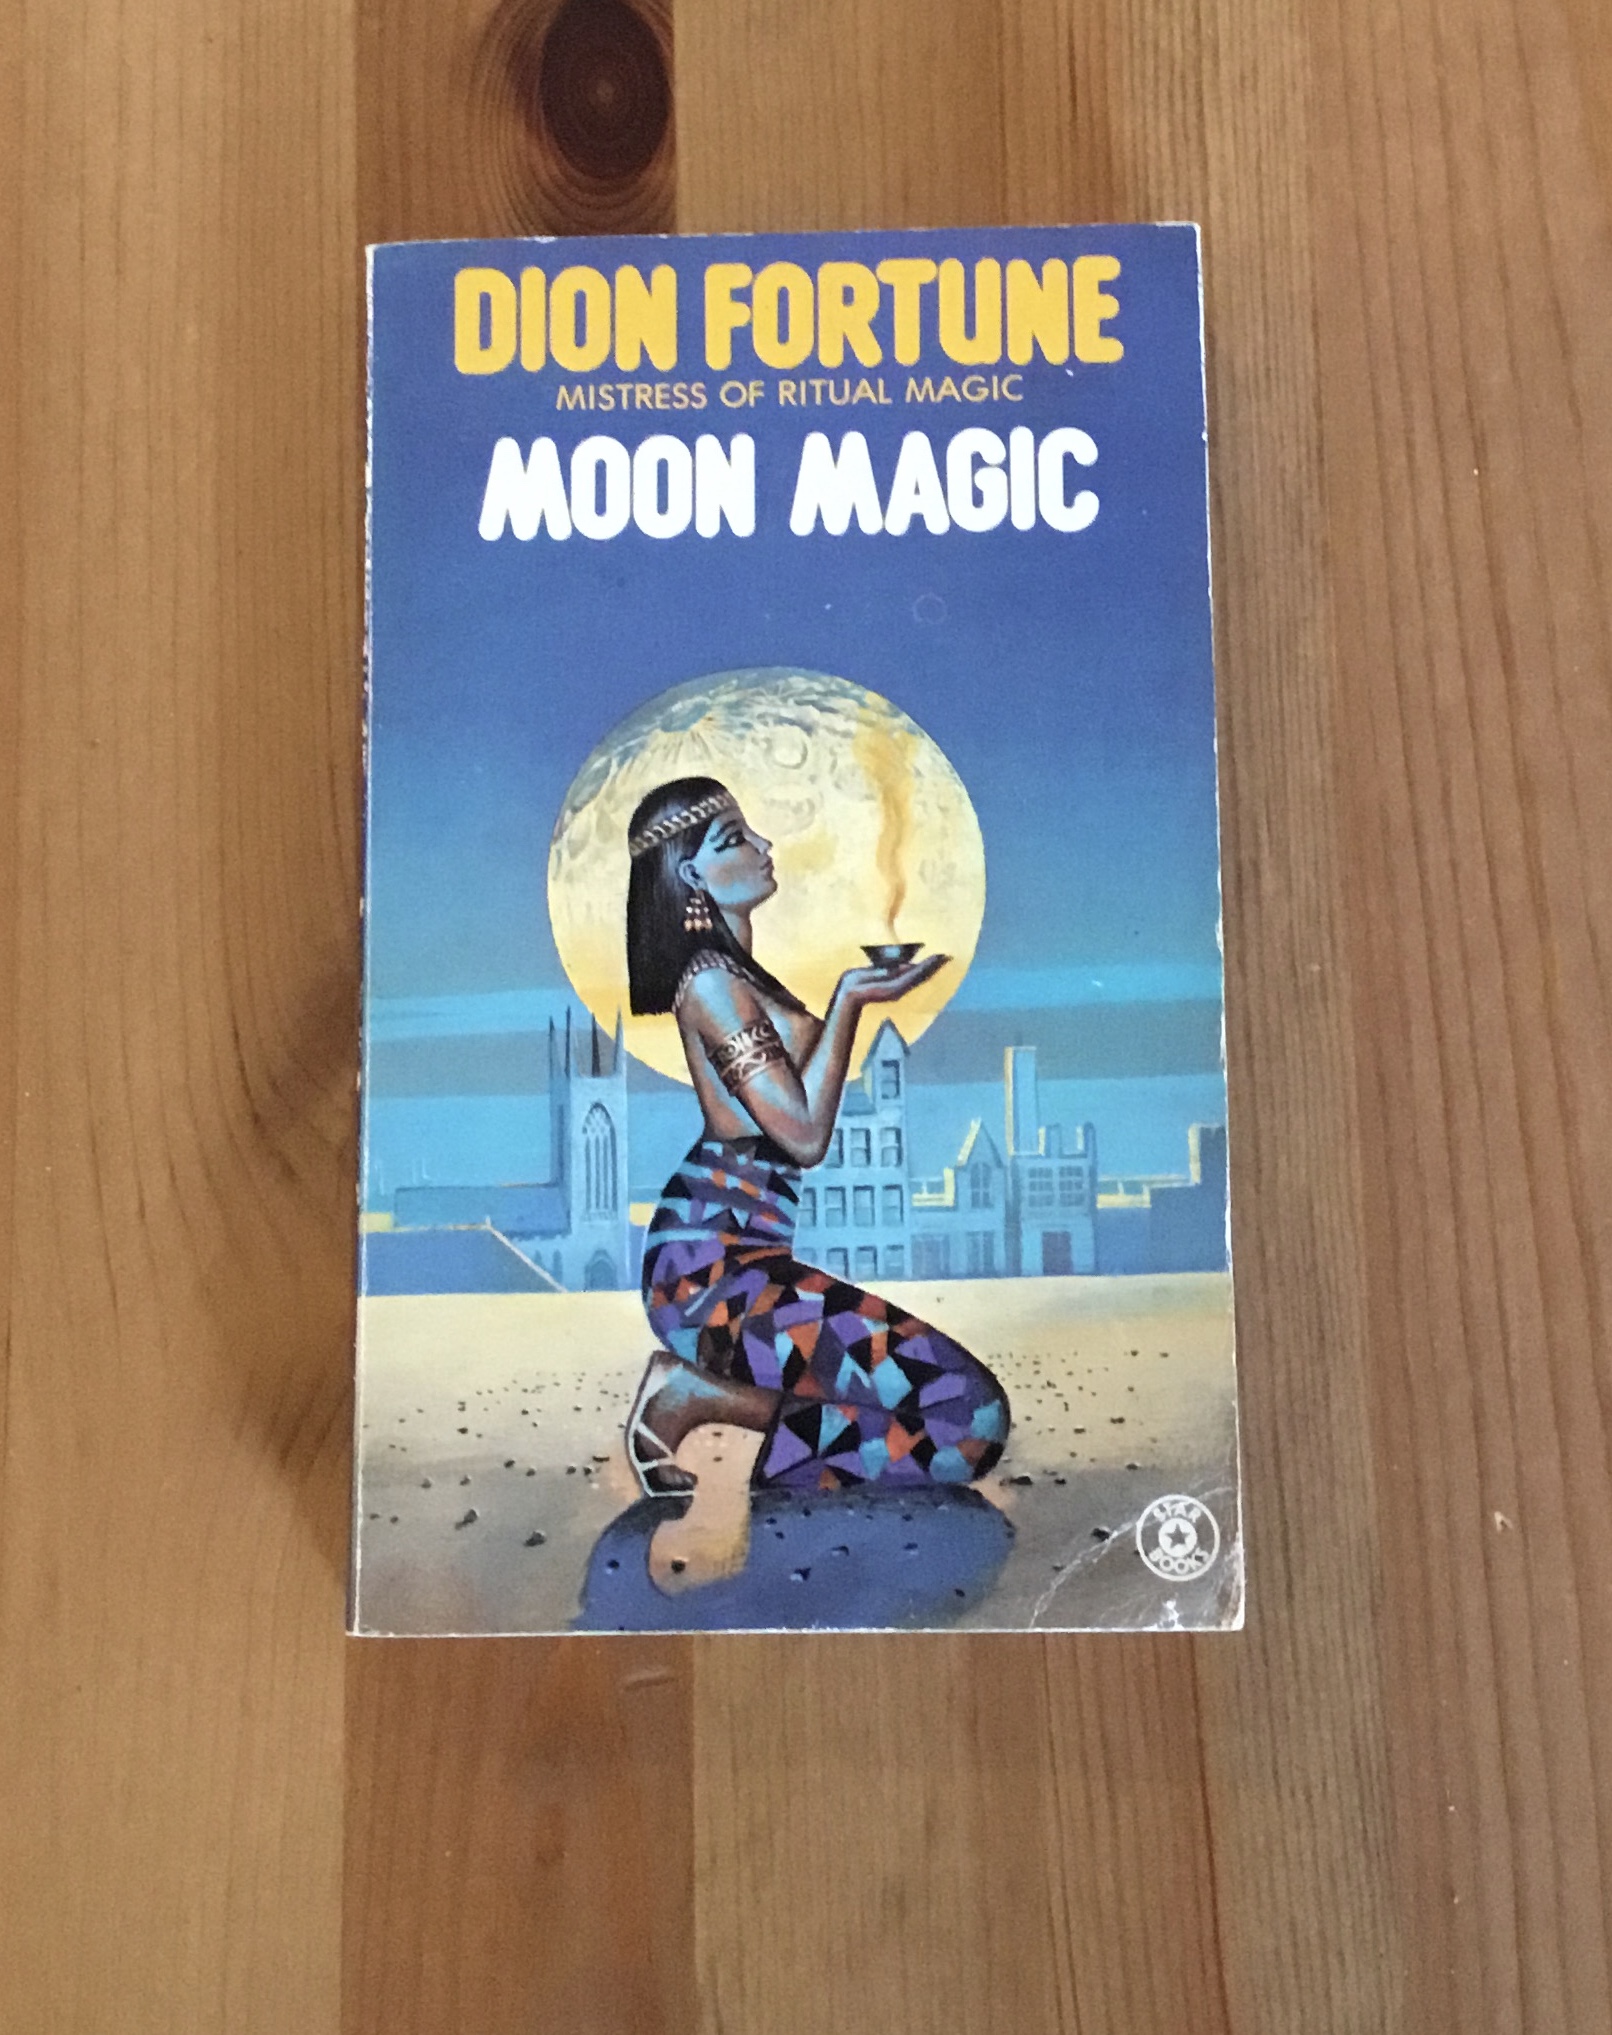 MOON MAGIC - FORTUNE, Dion.